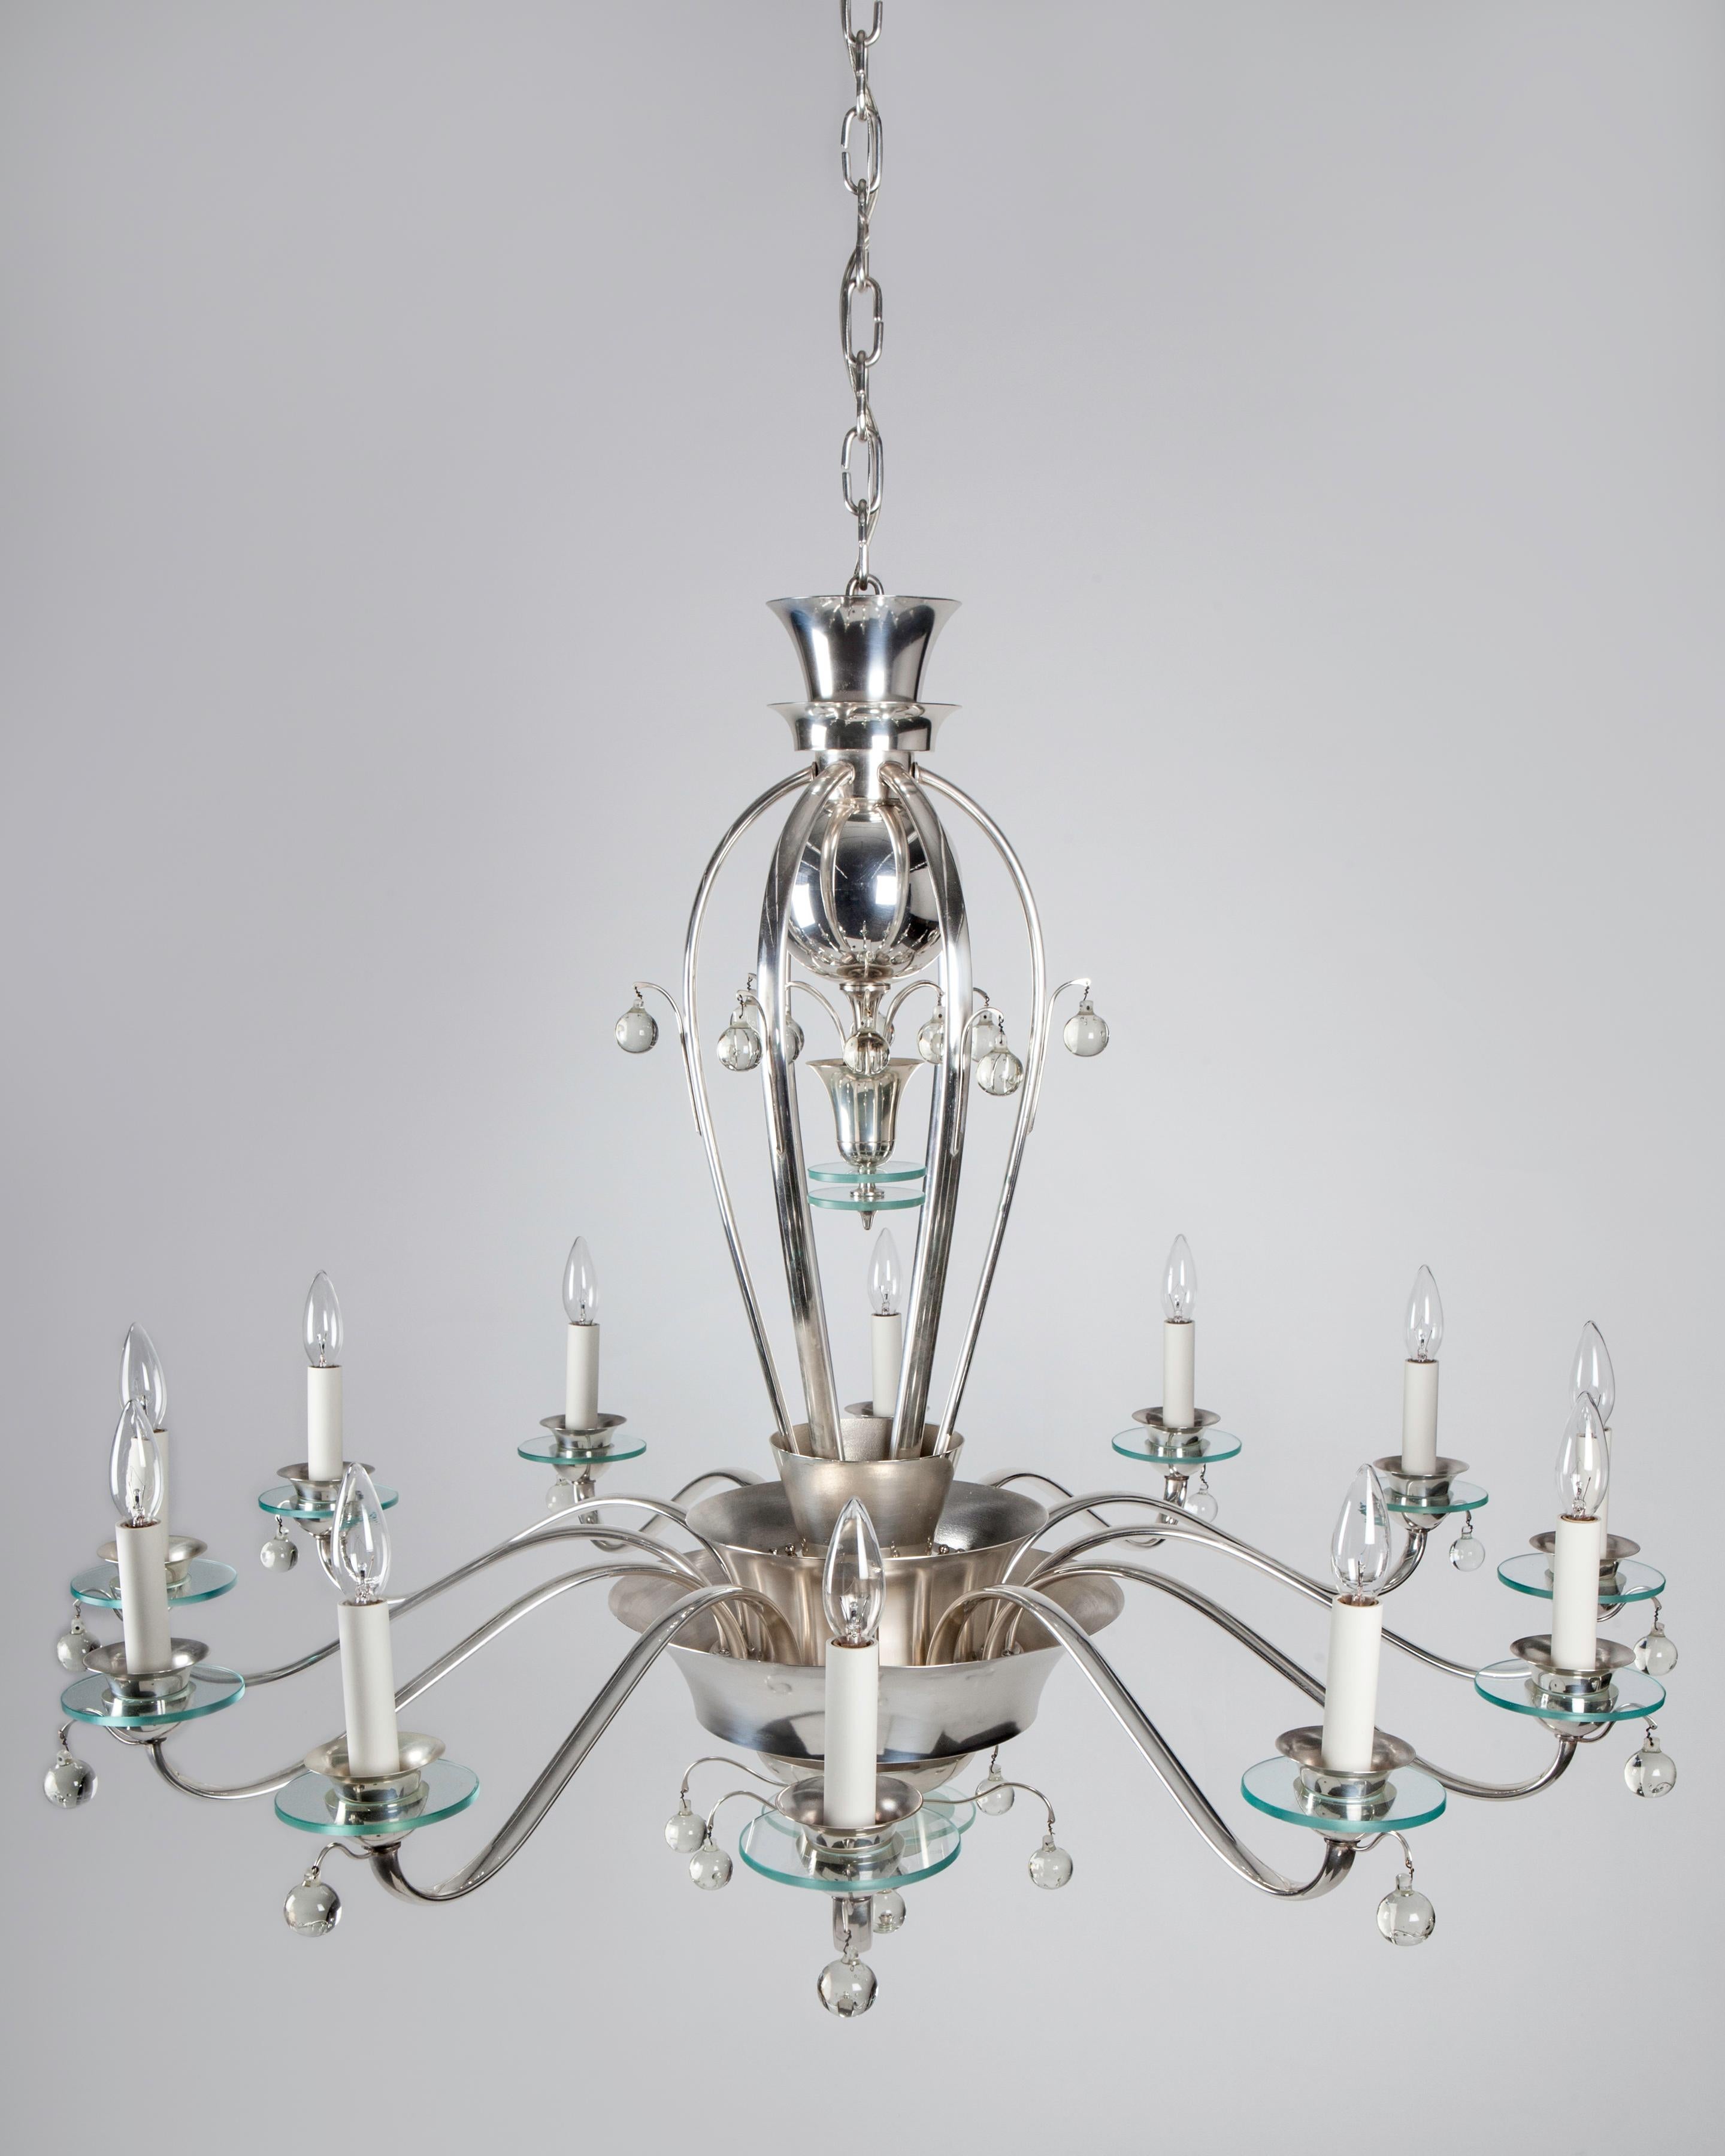 AHL4157
Circa 1930
A vintage Art Deco period silver plate chandelier with twelve arms radiating from a nested set of central bowls. Each arm terminates with a round plate glass bobeche and a clear crystal ball drop. Due to the antique nature of this